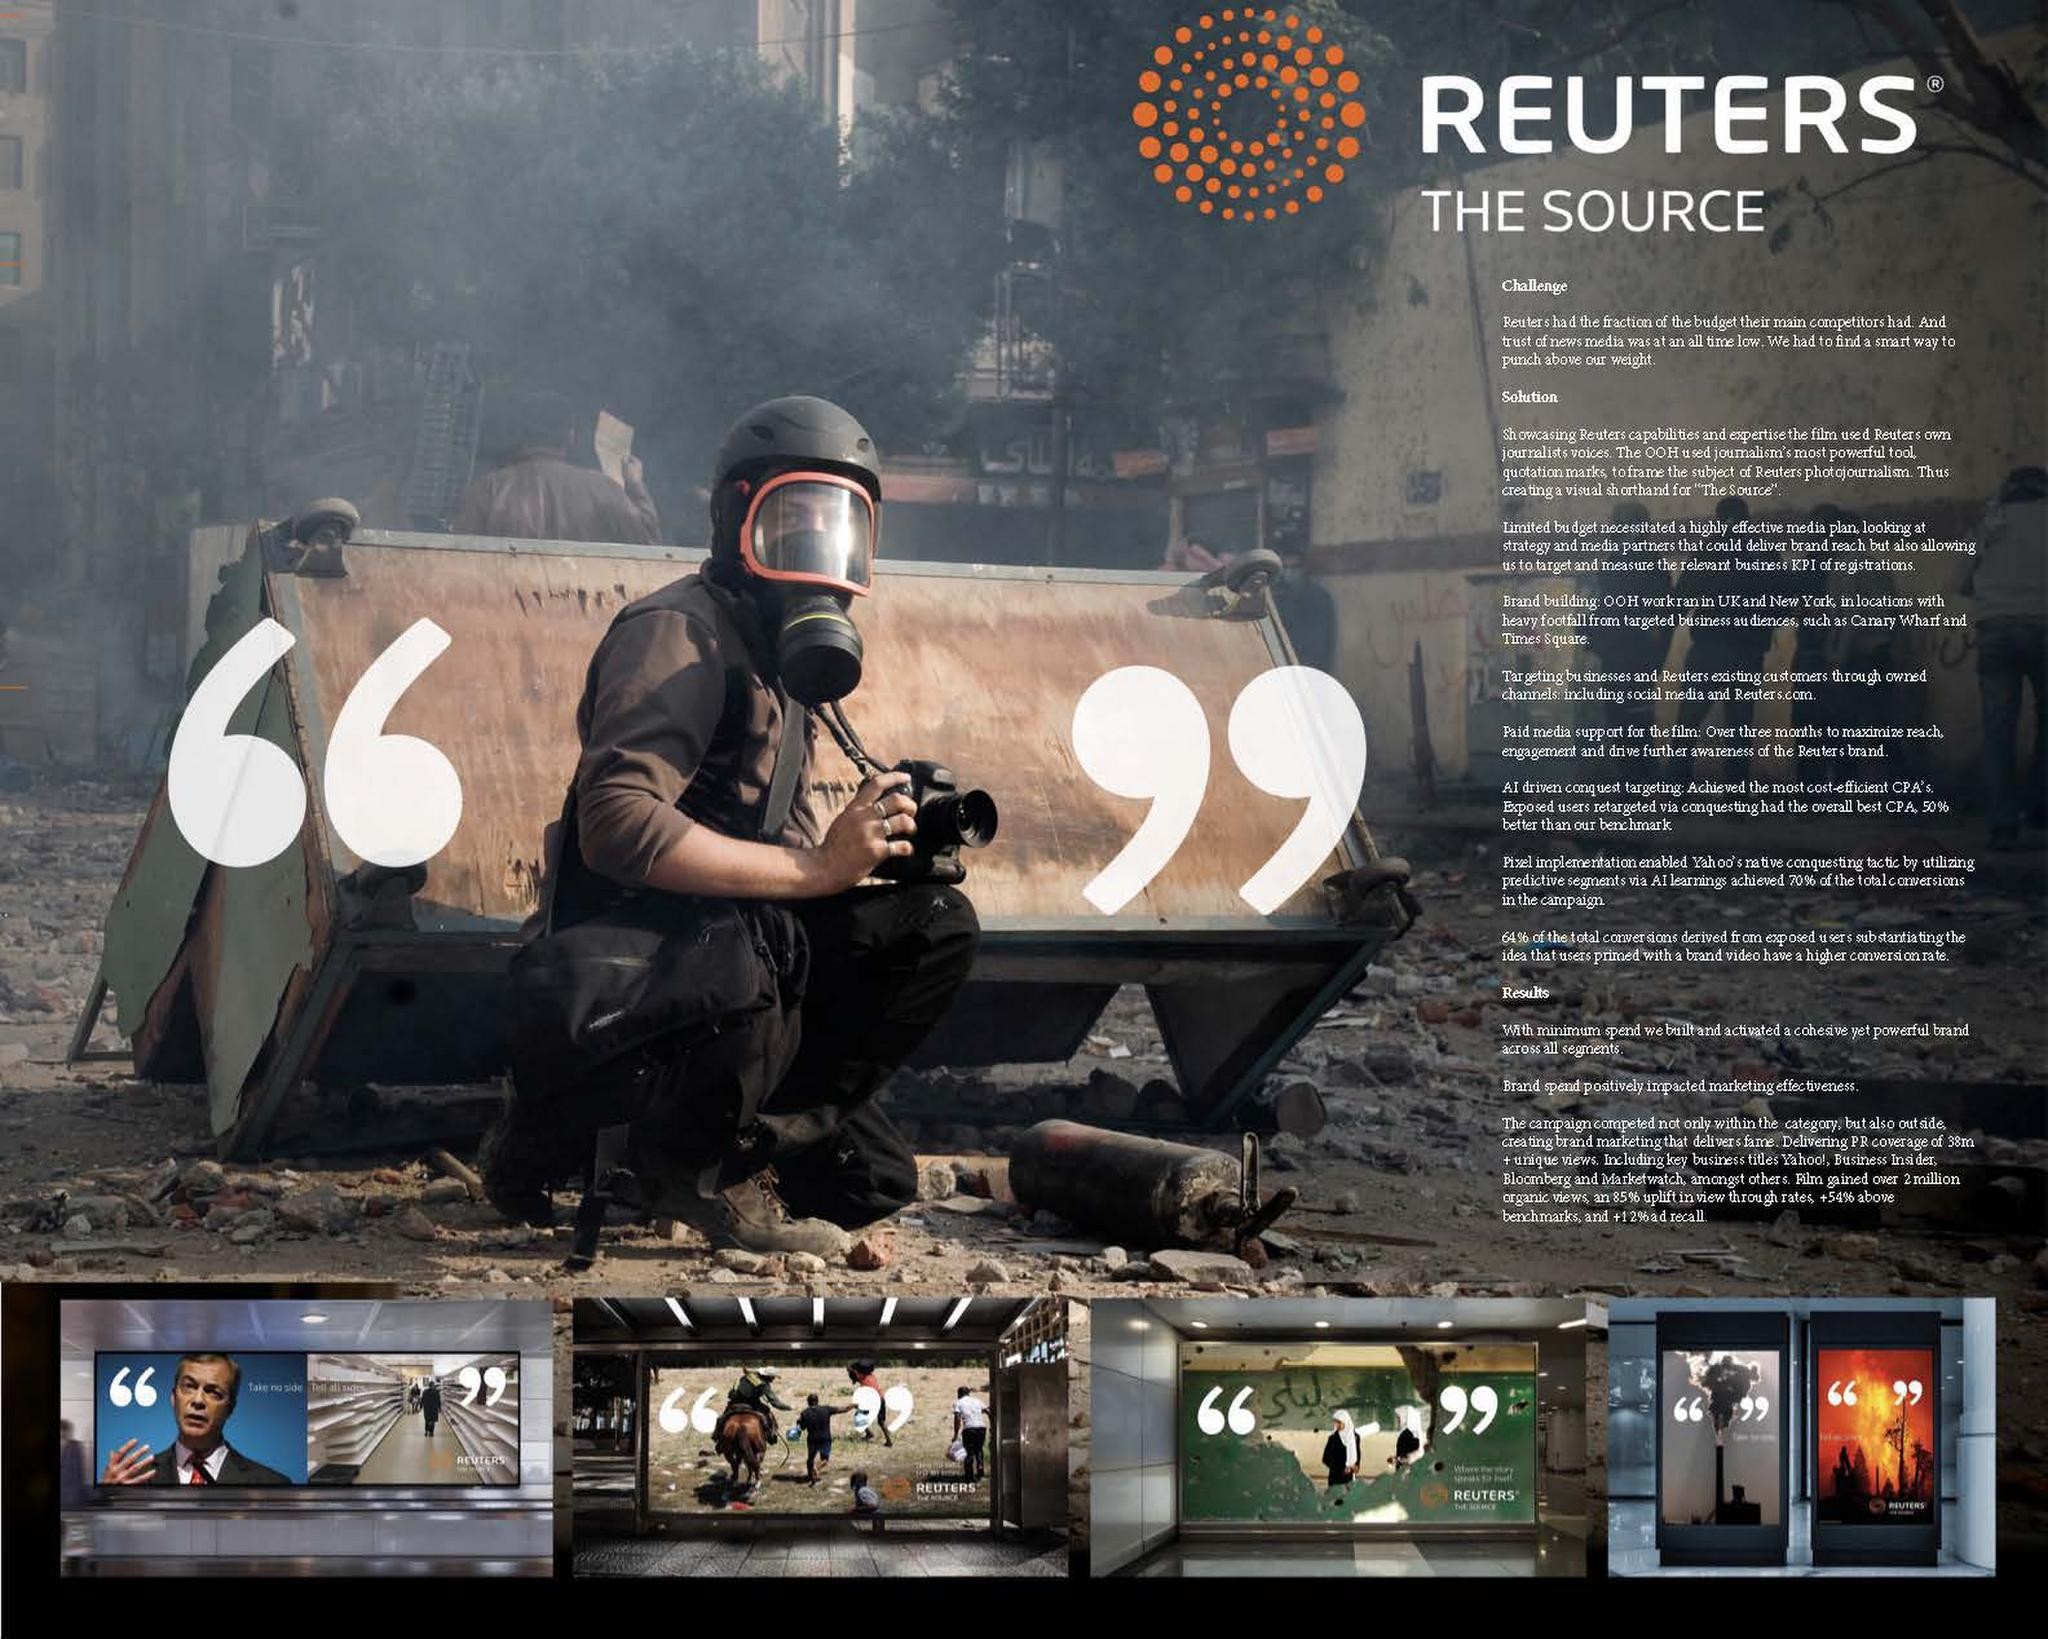 Reuters "The Source" Launch